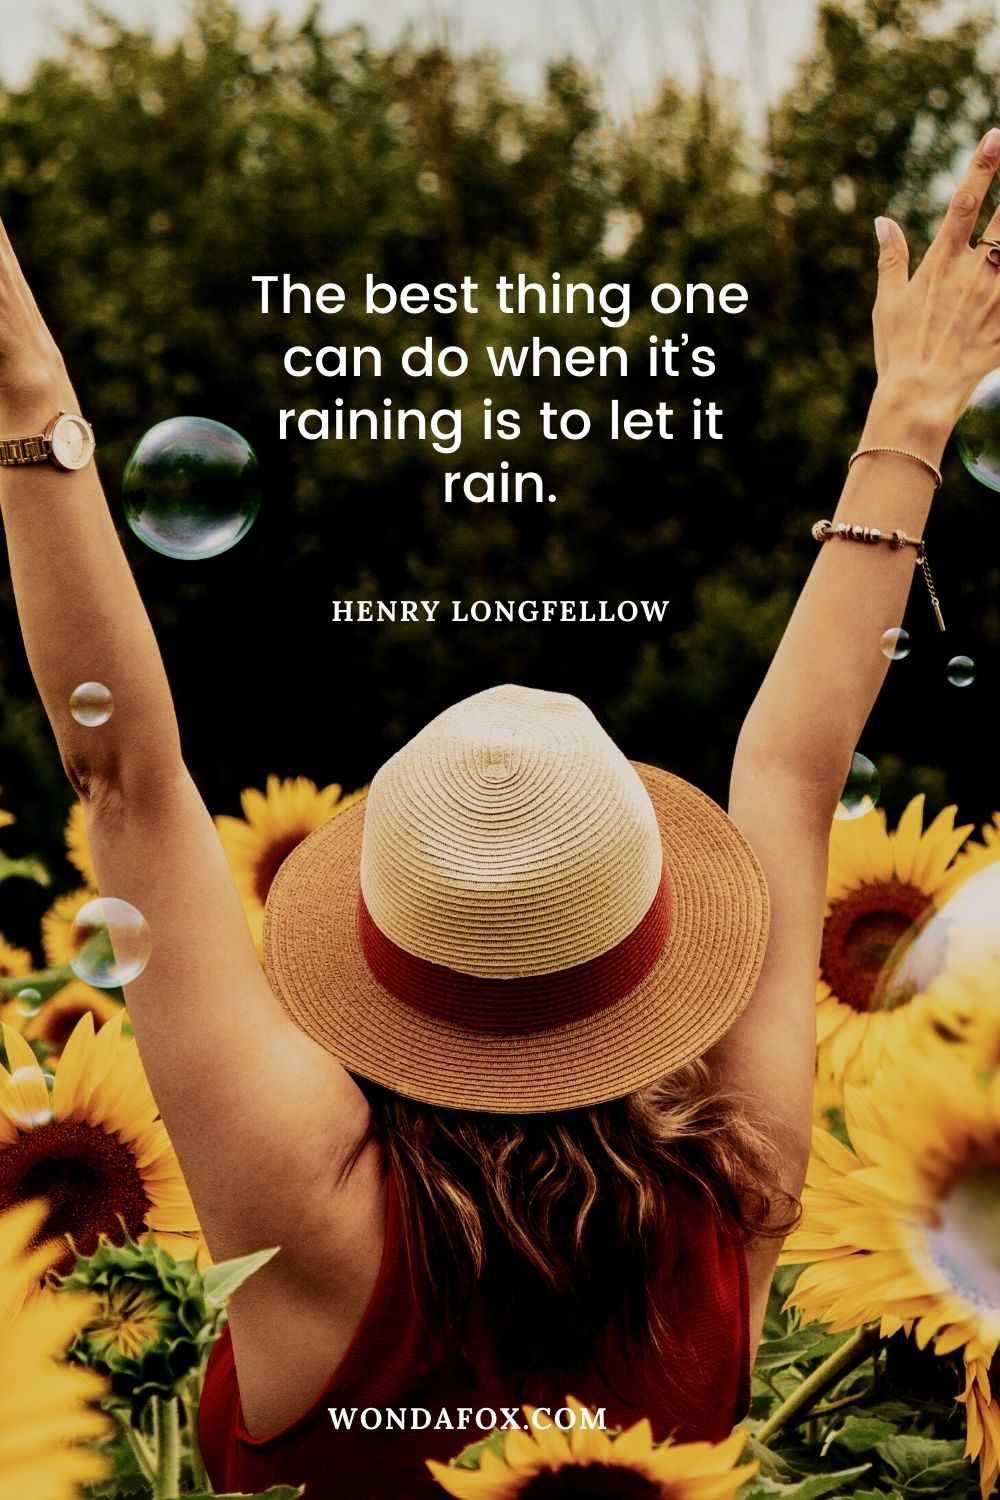 The best thing one can do when it’s raining is to let it rain.